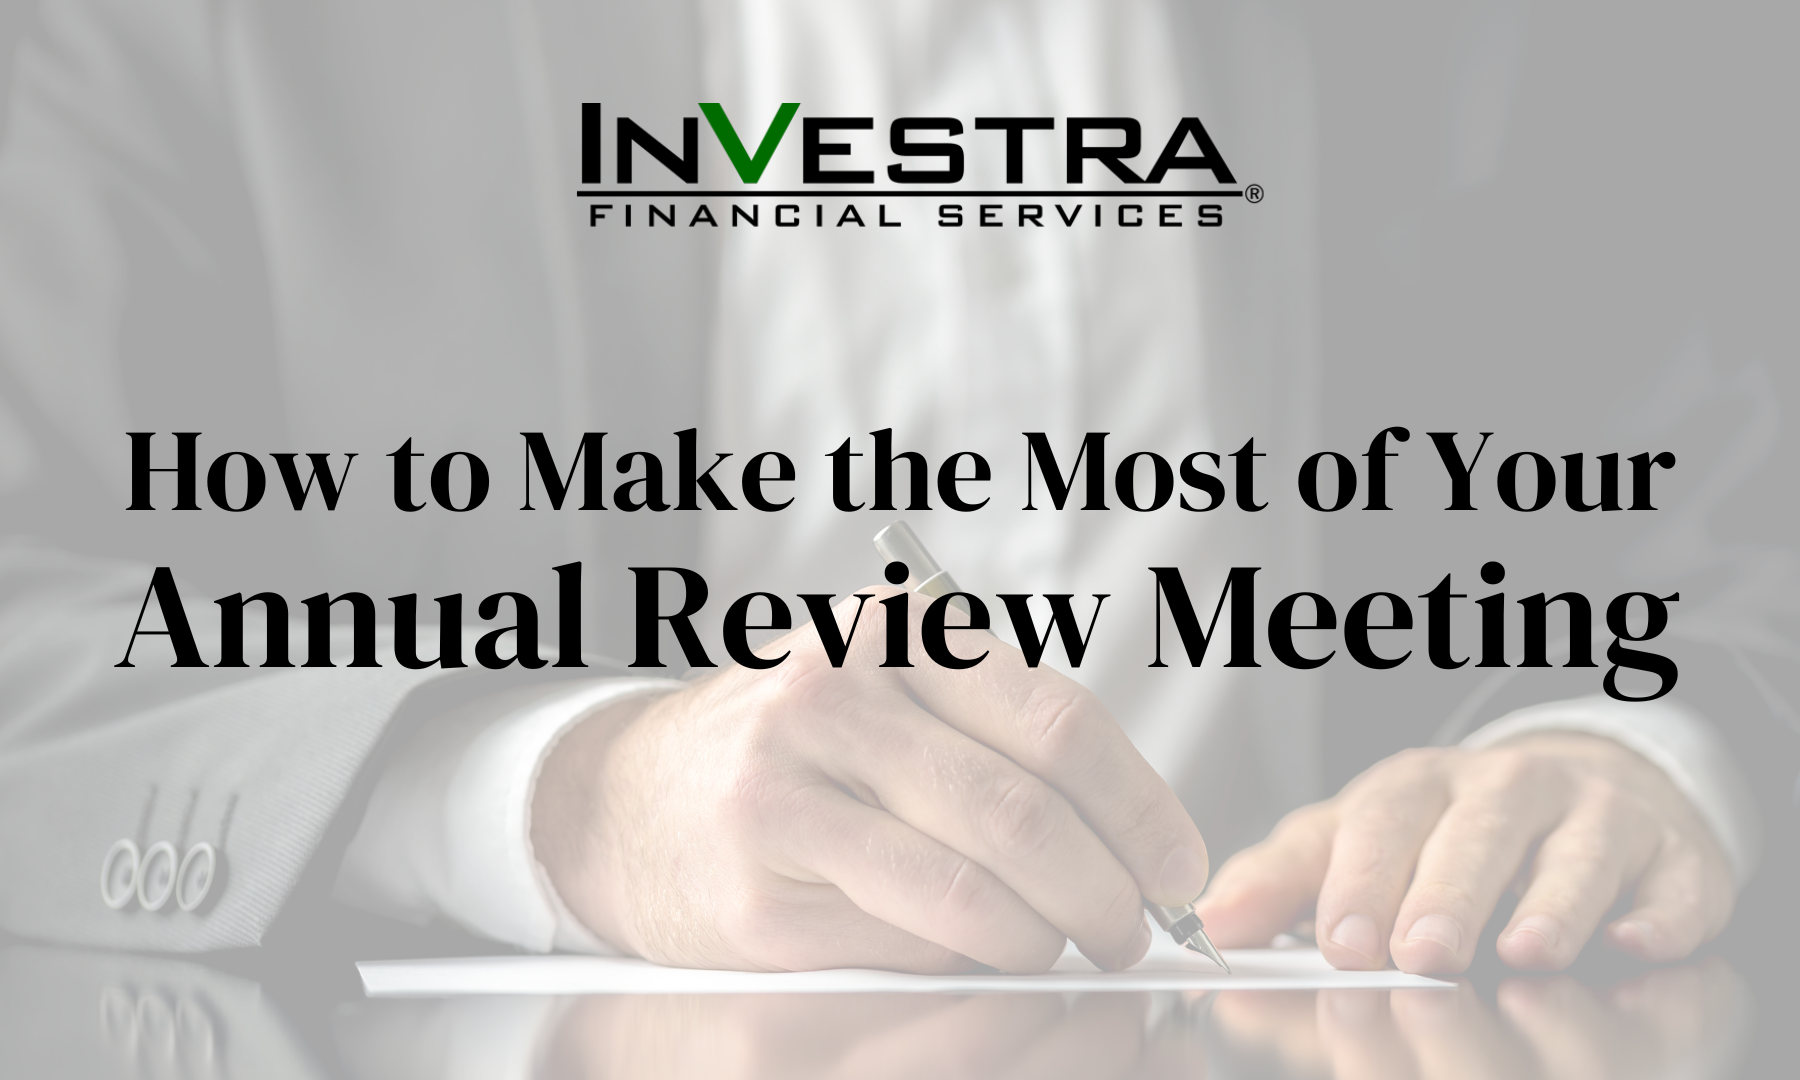 Making the Most of Your Annual Account Review Meeting